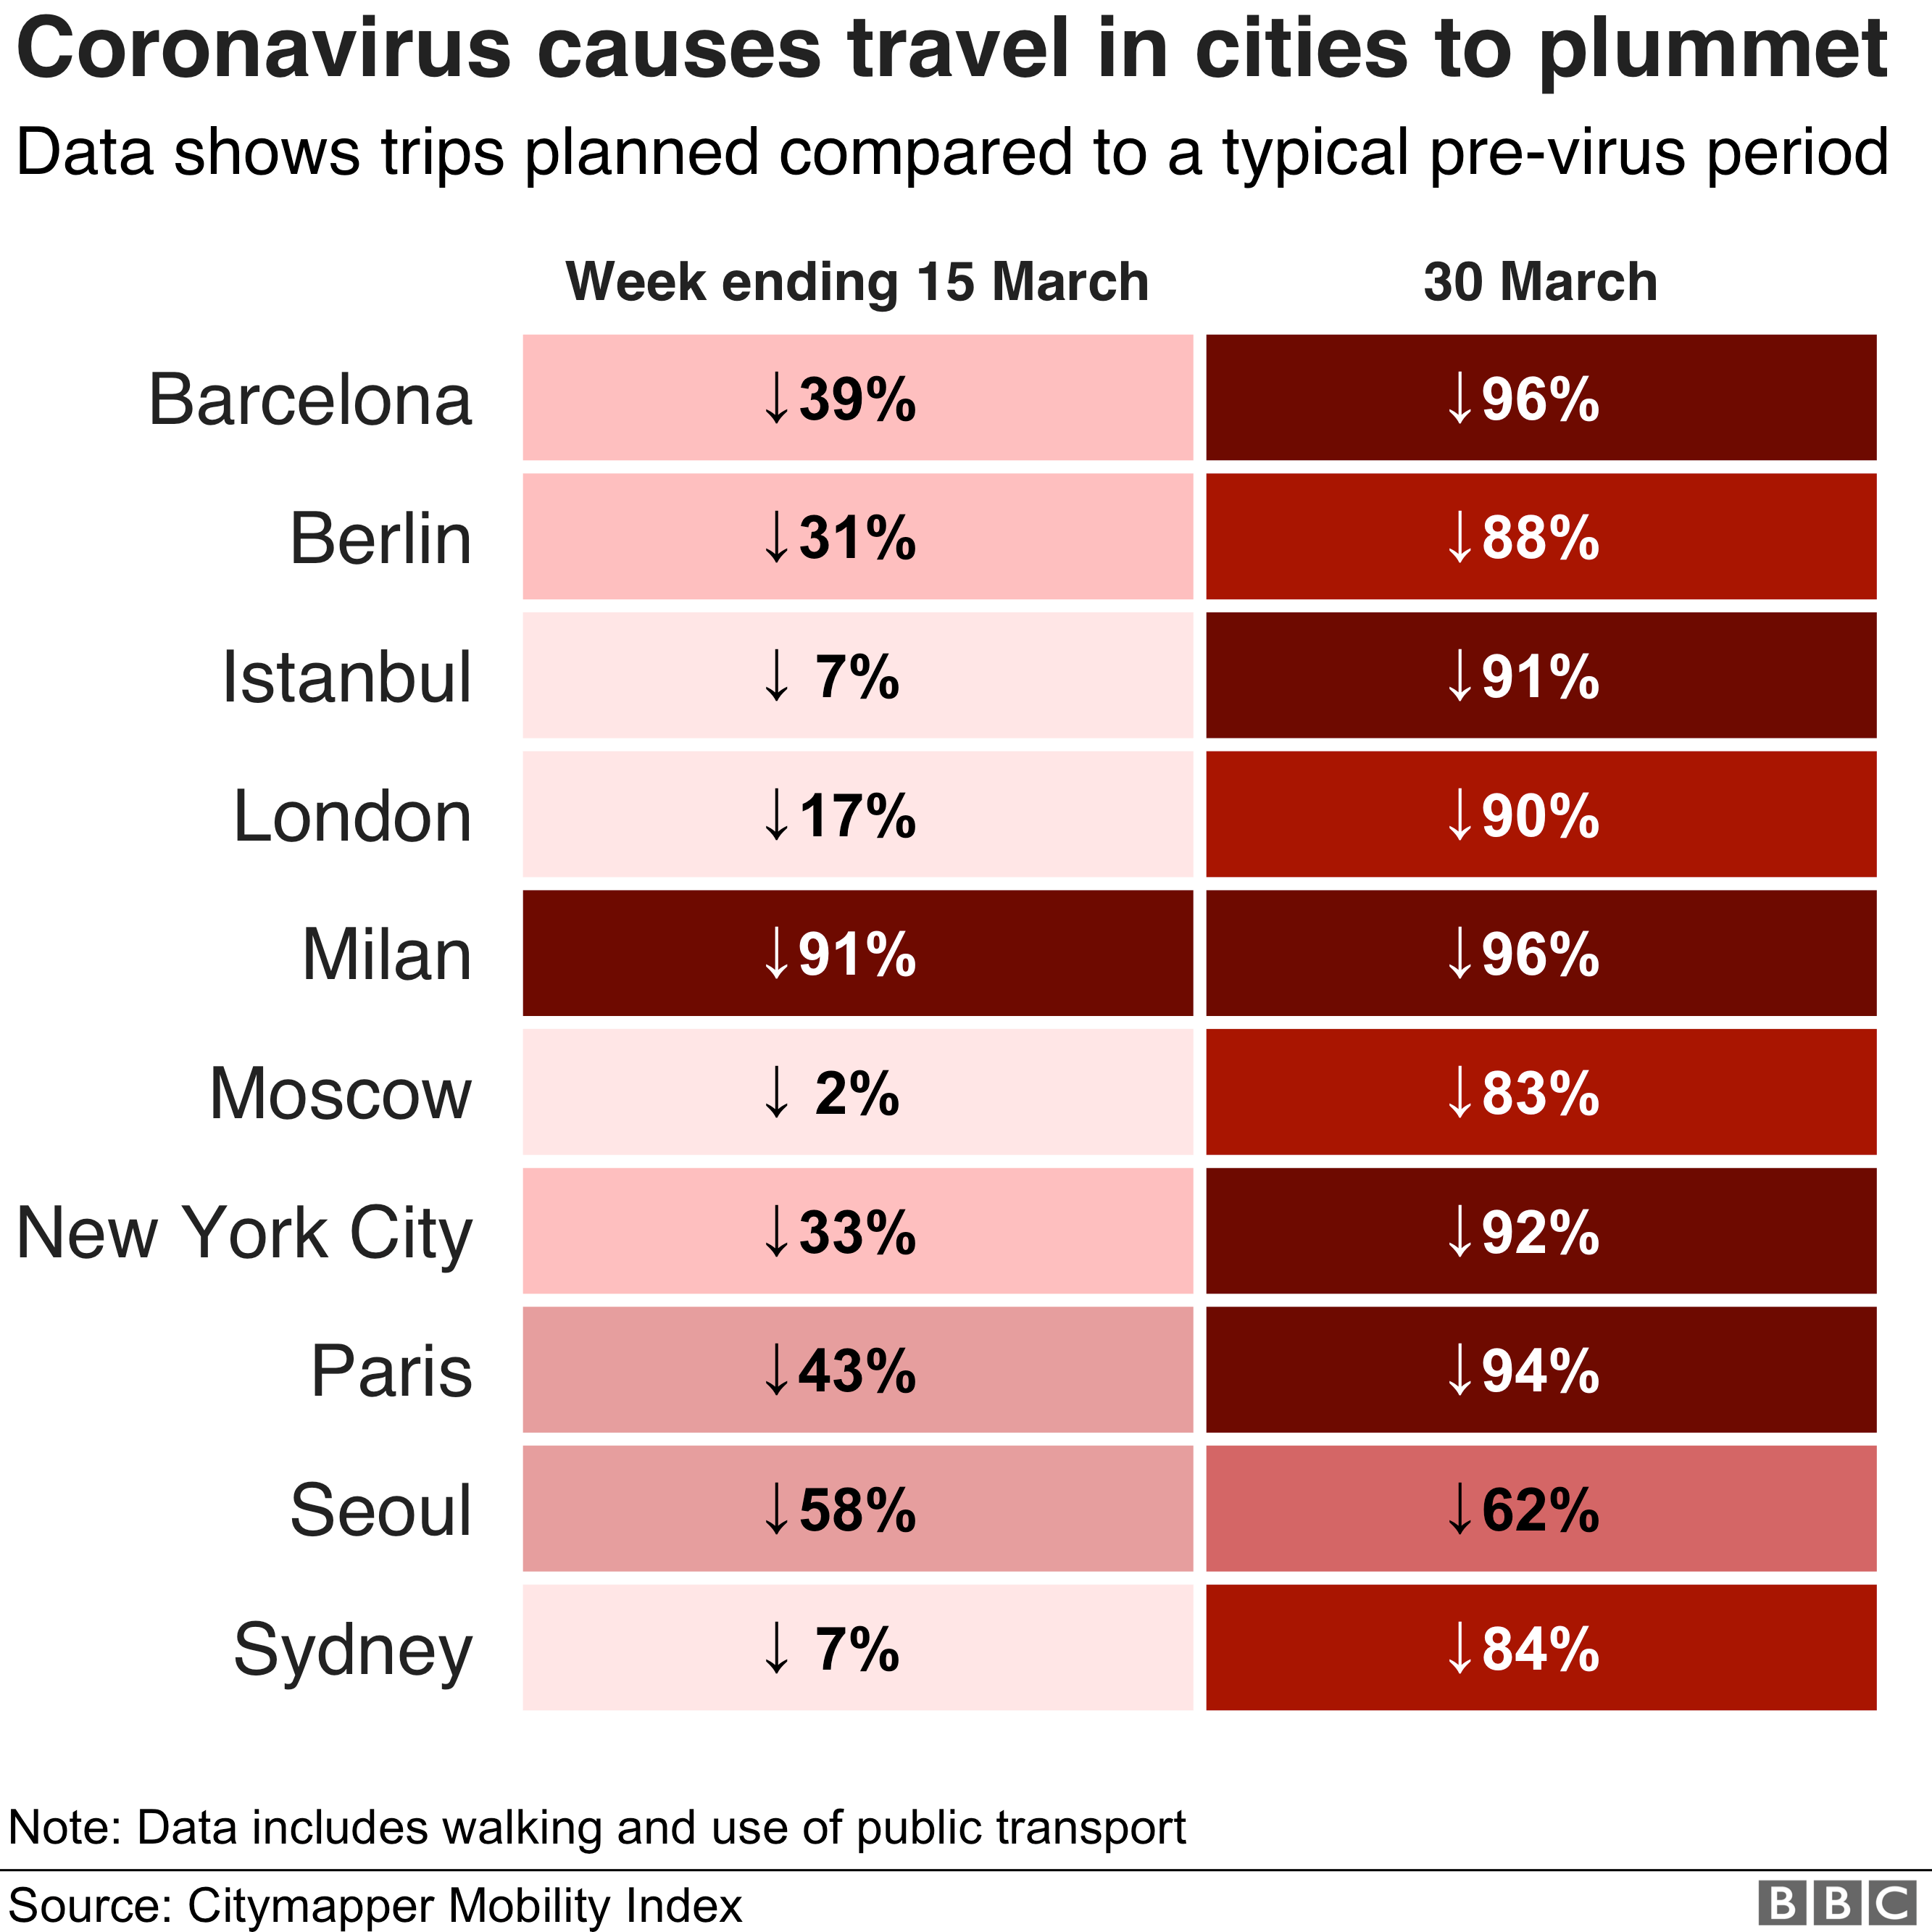 Chart showing how people in cities with restrictions have curbed their travel plans